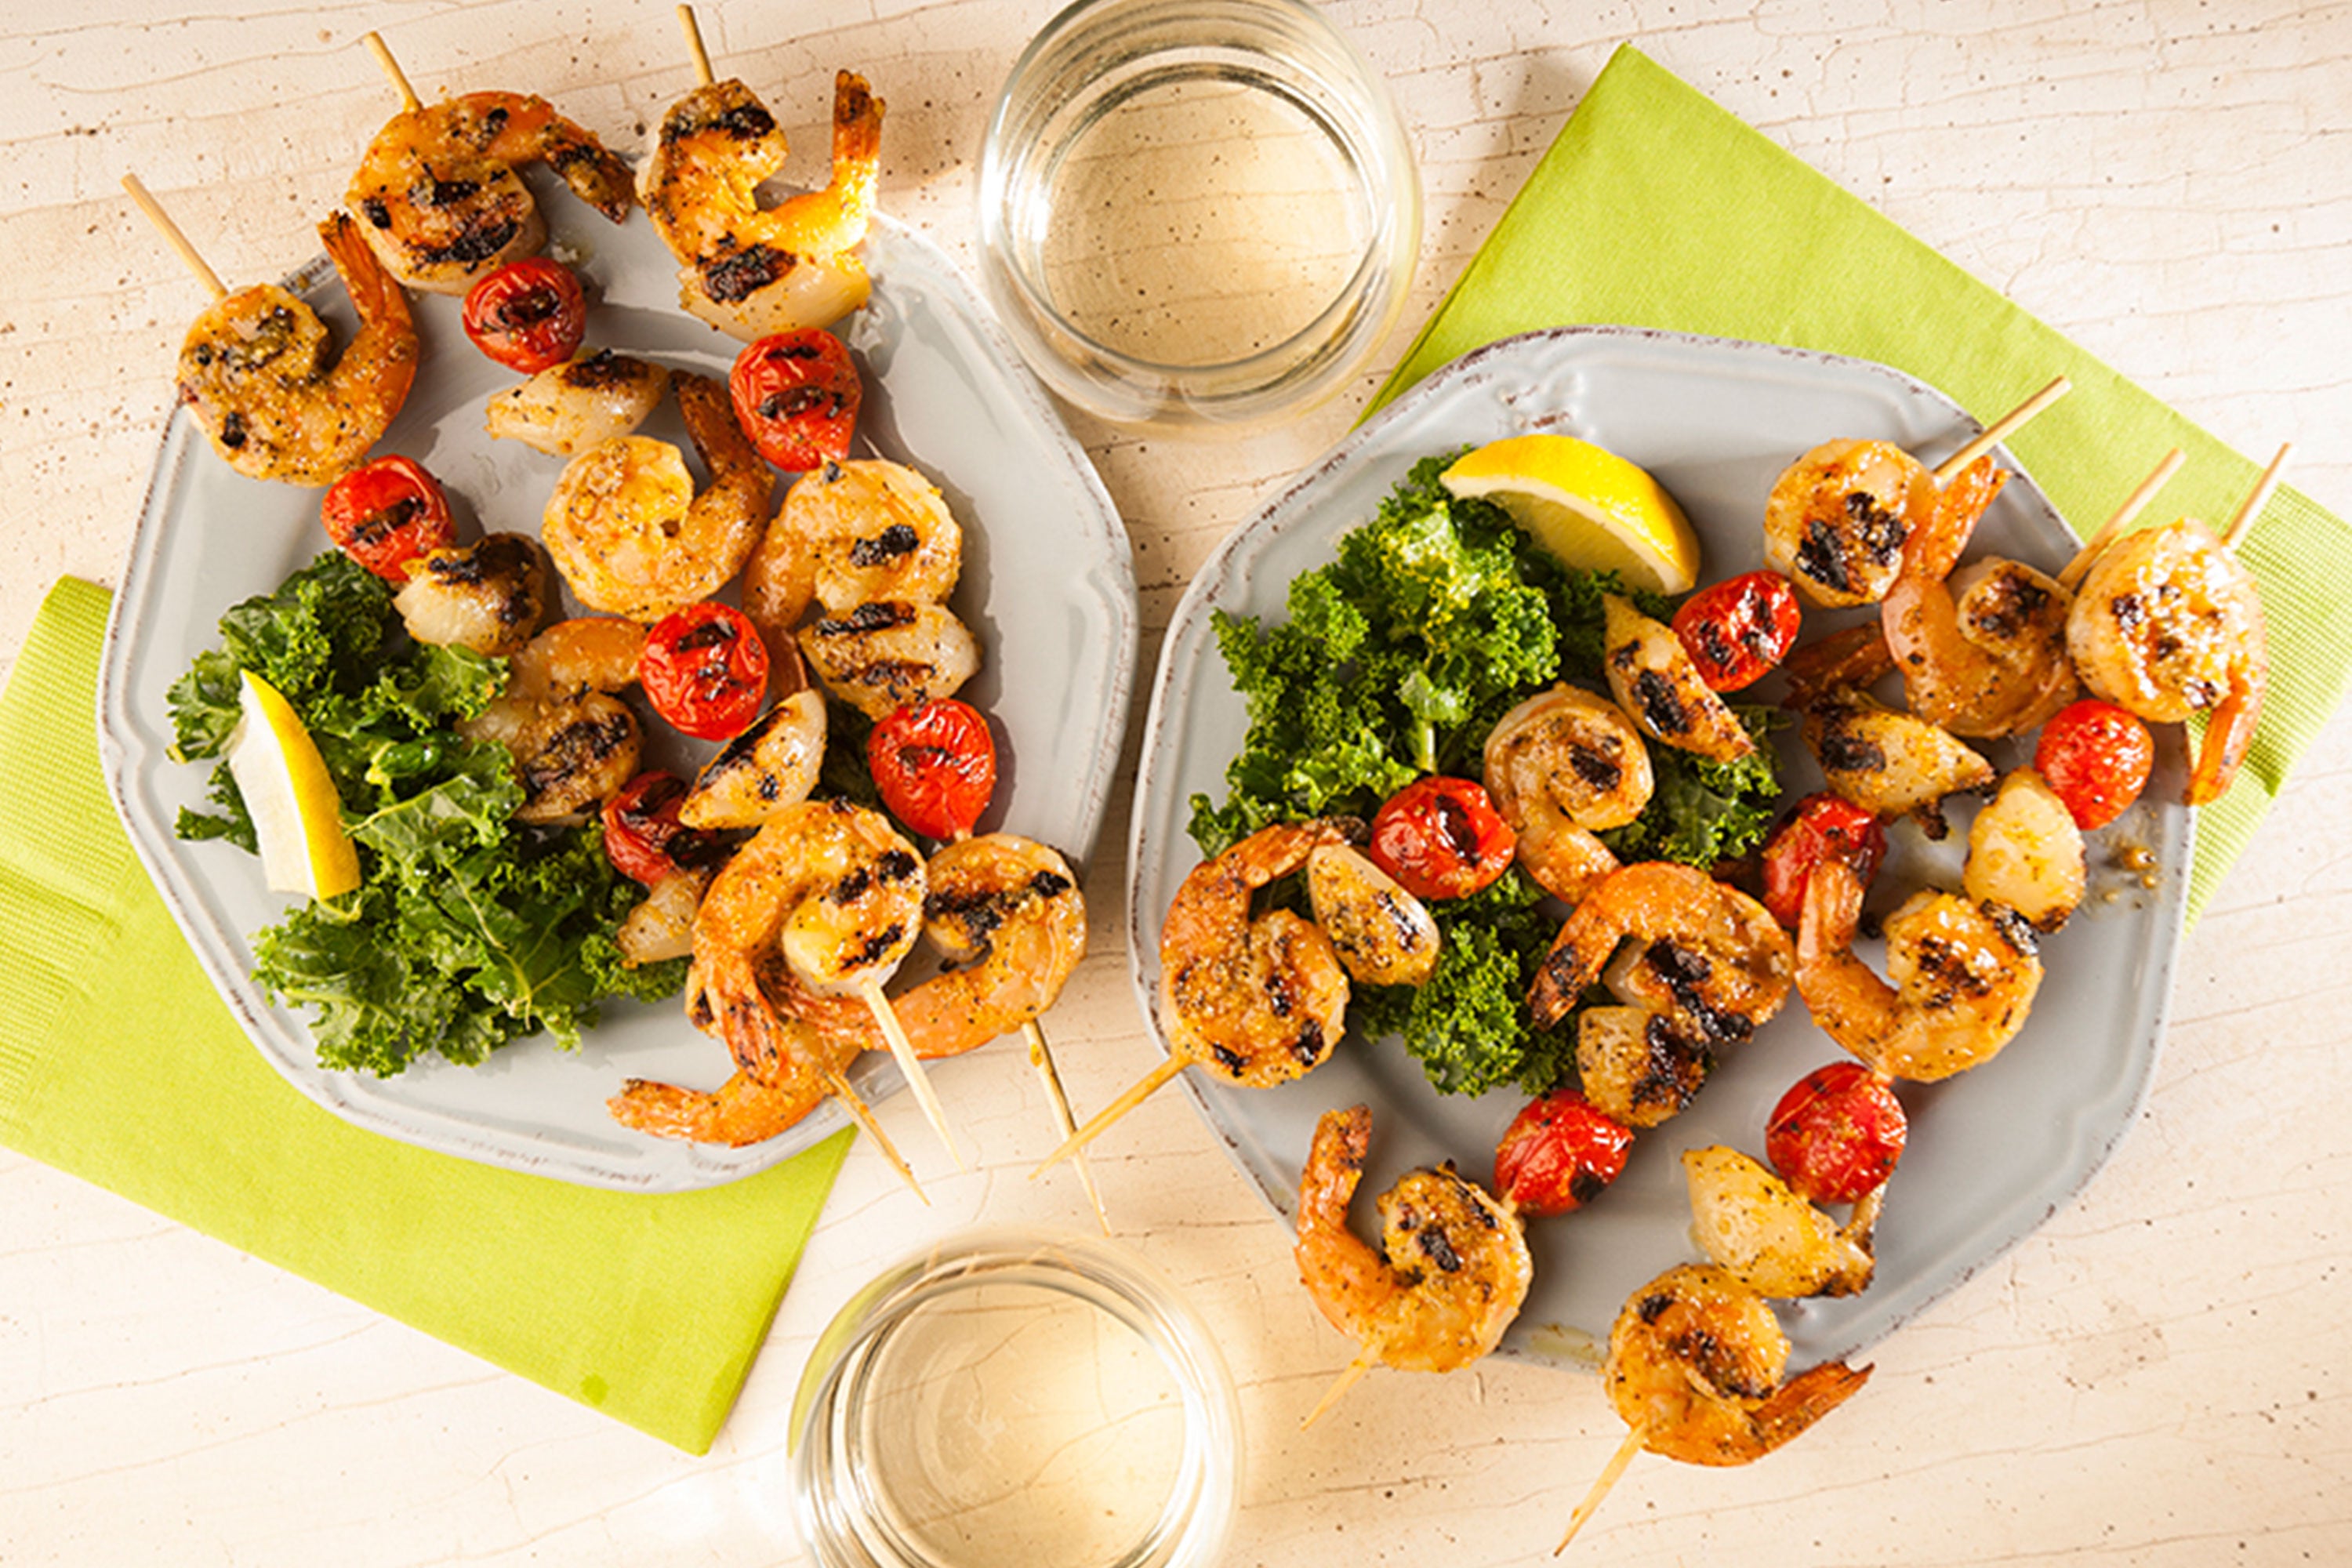 Skewers with shrimp and vegetables